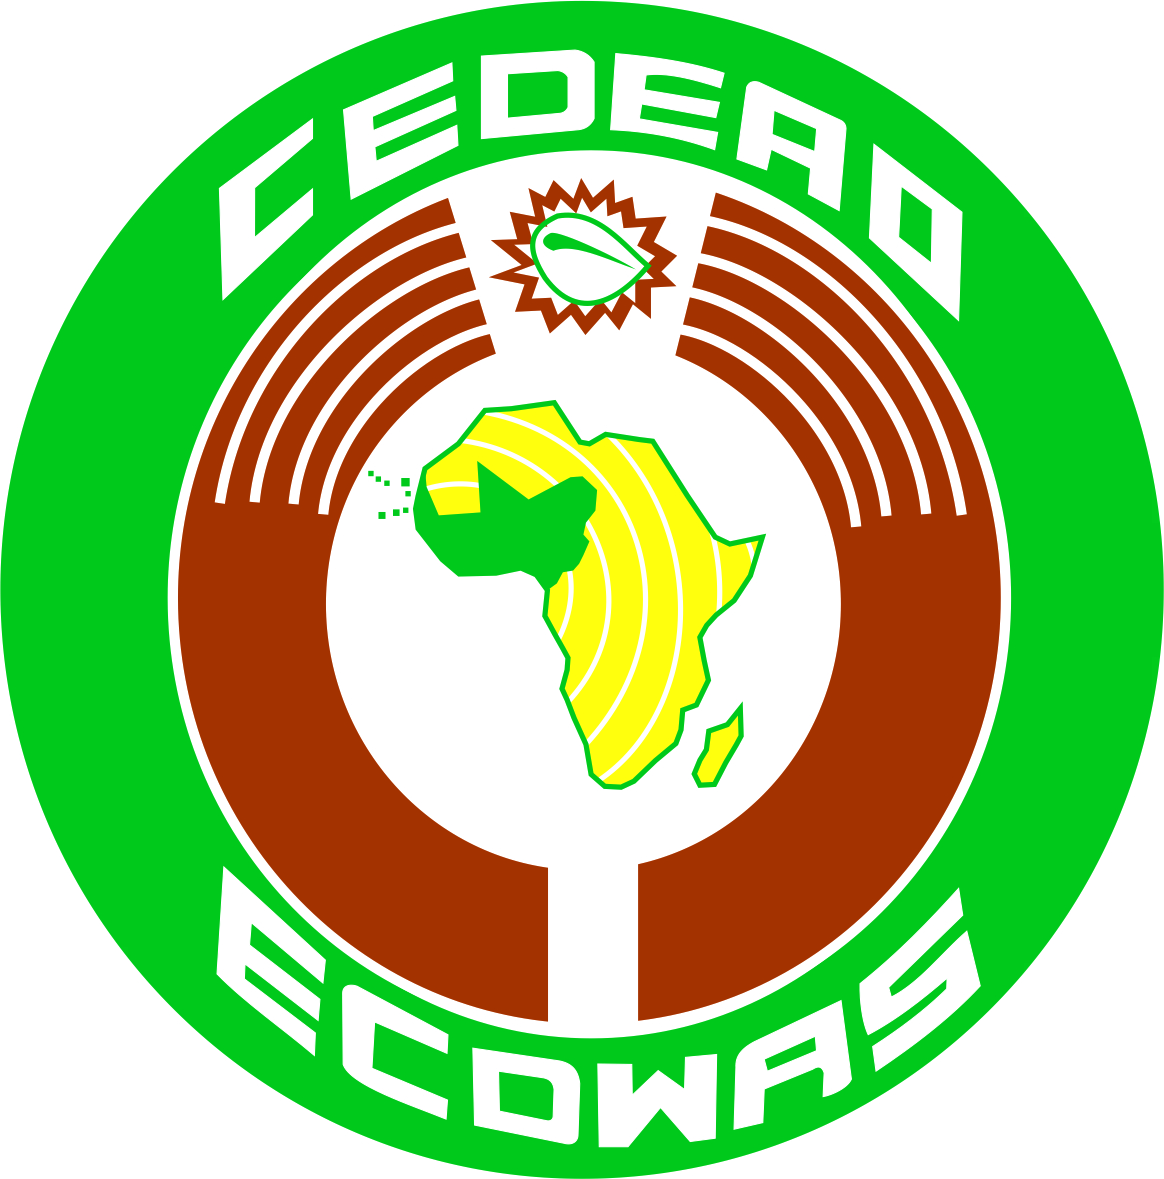 Seventh Meeting of Economic Community of West African States (ECOWAS) Finance Ministers to hold in Abidjan, Côte d’Ivoire